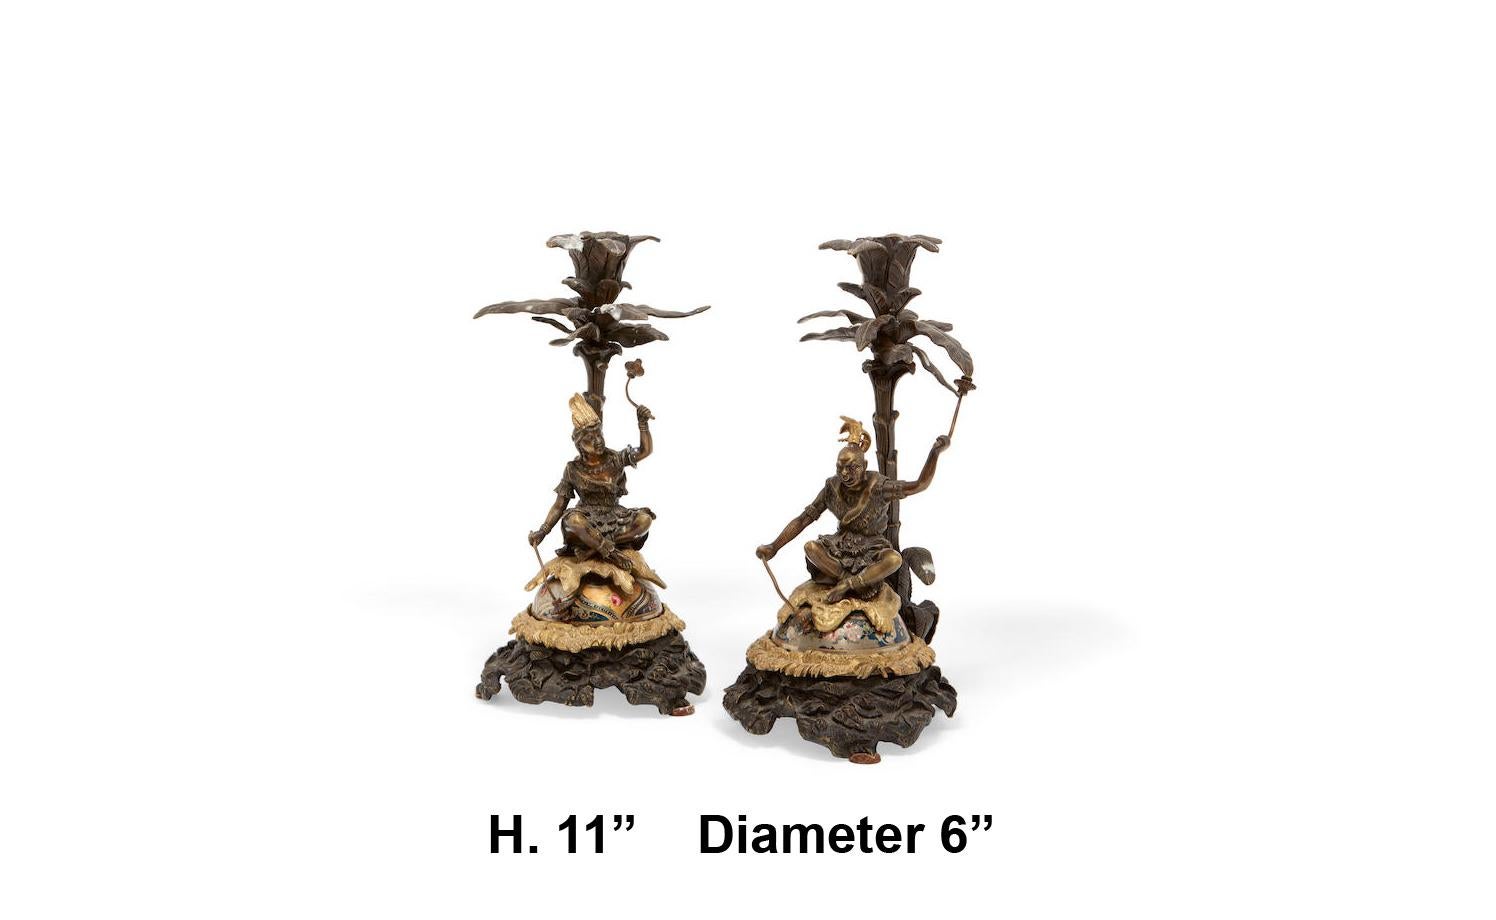 Unique pair of 19th century French Chinoiserie patinated and parcel-gilt bronze figural candlesticks. 

Each candlestick is surmounted with a leaf-tip candleholder, over a bamboo-shaped stem issuing a foliate inspired drip pan, over an intricate